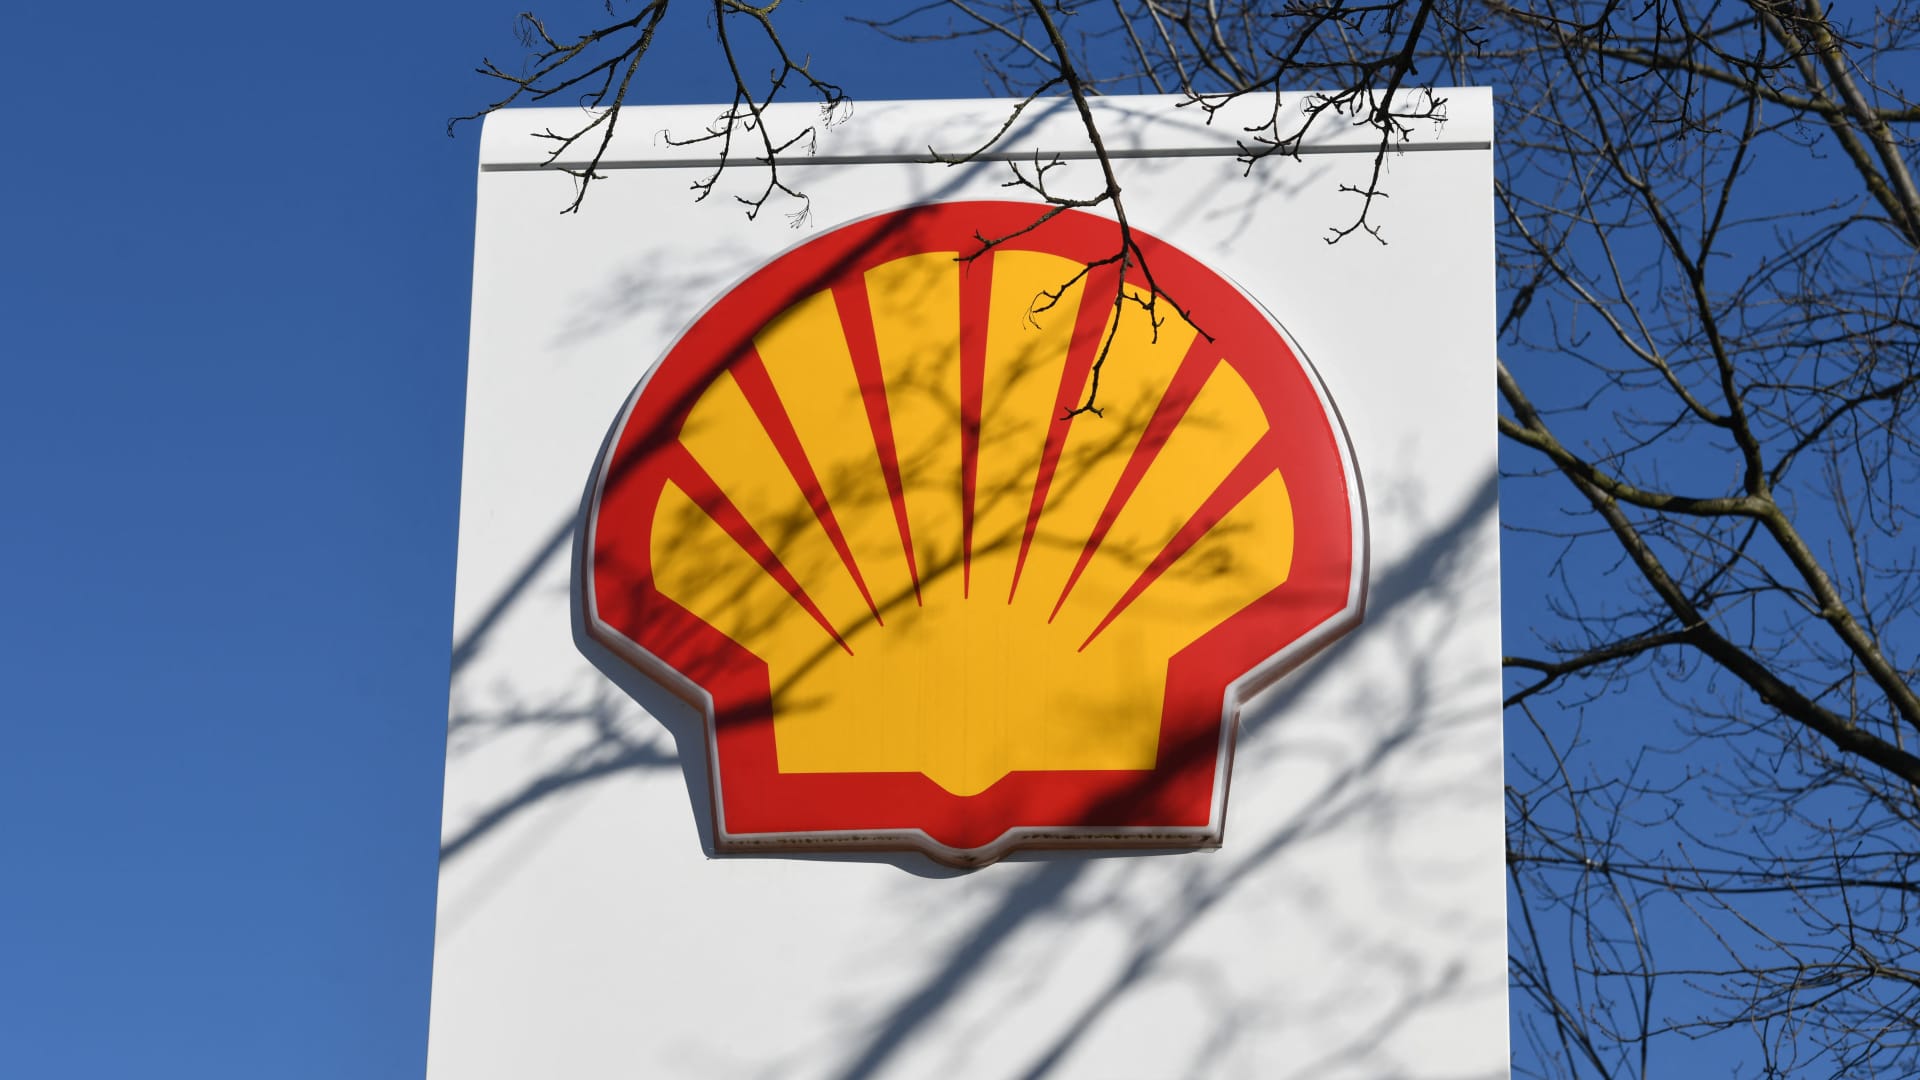 Shell expects a weaker third quarter due to slower demand.